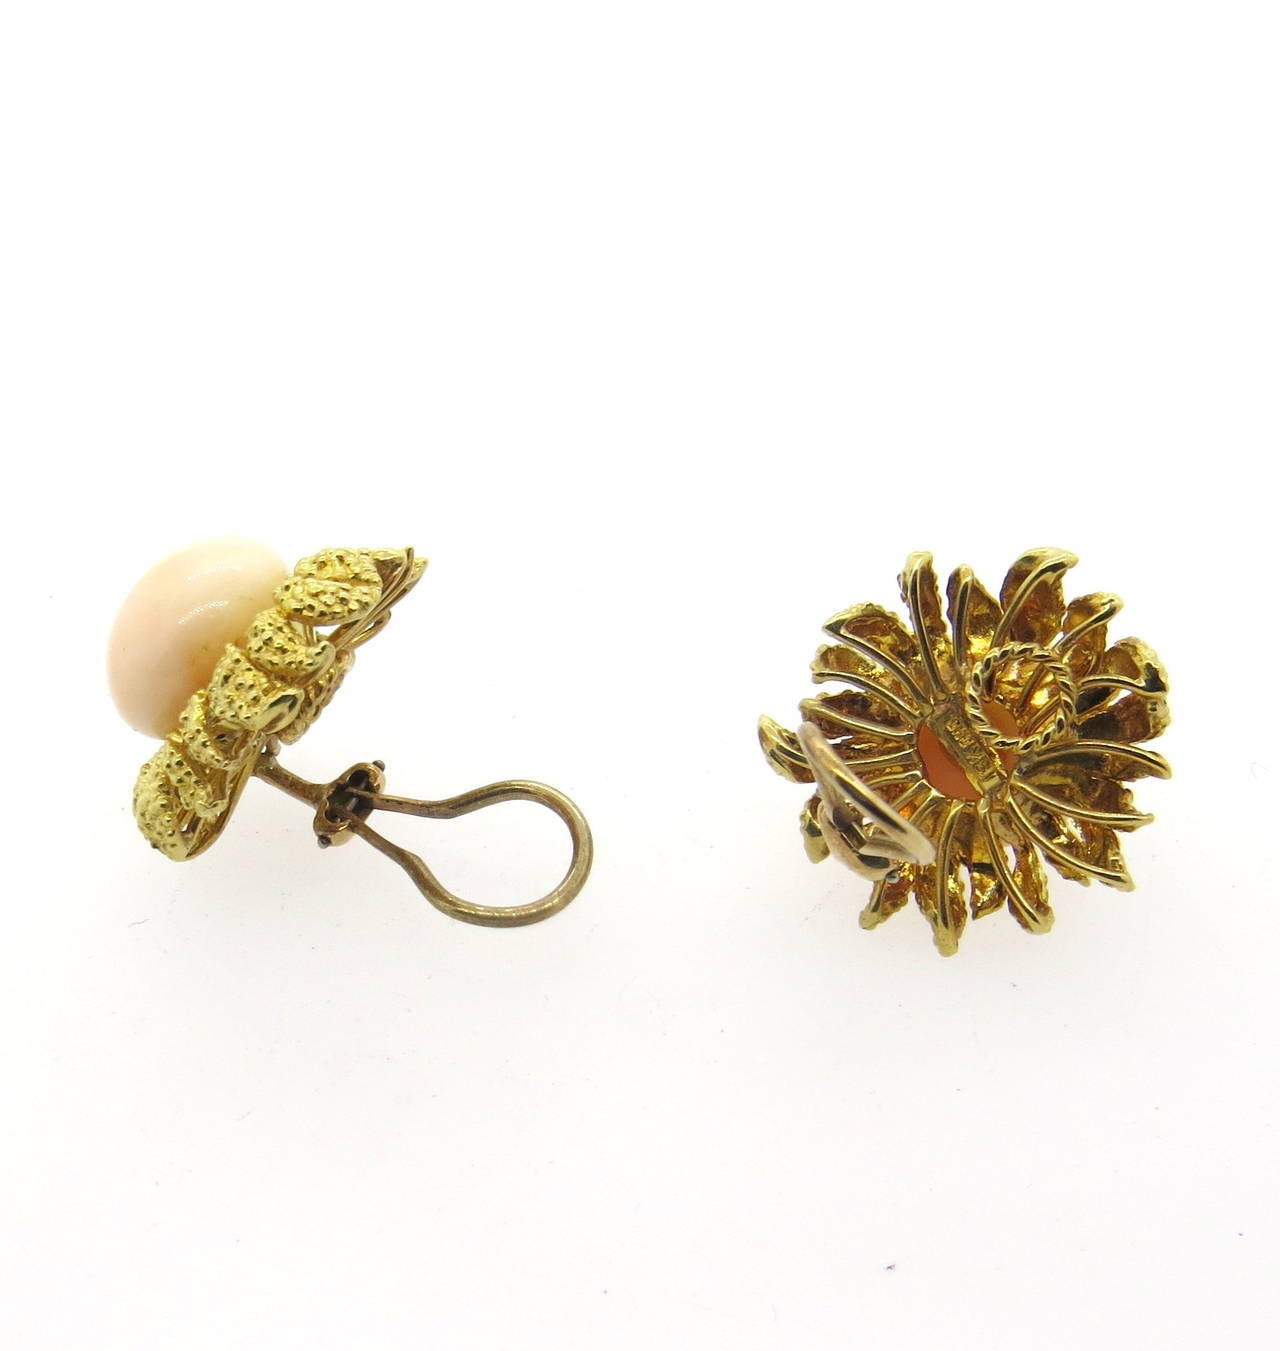 A pair of 18k yellow gold earrings set with coral (13.6mm in diameter).  The earrings measure 25mm x 24mm and weigh 23 grams.